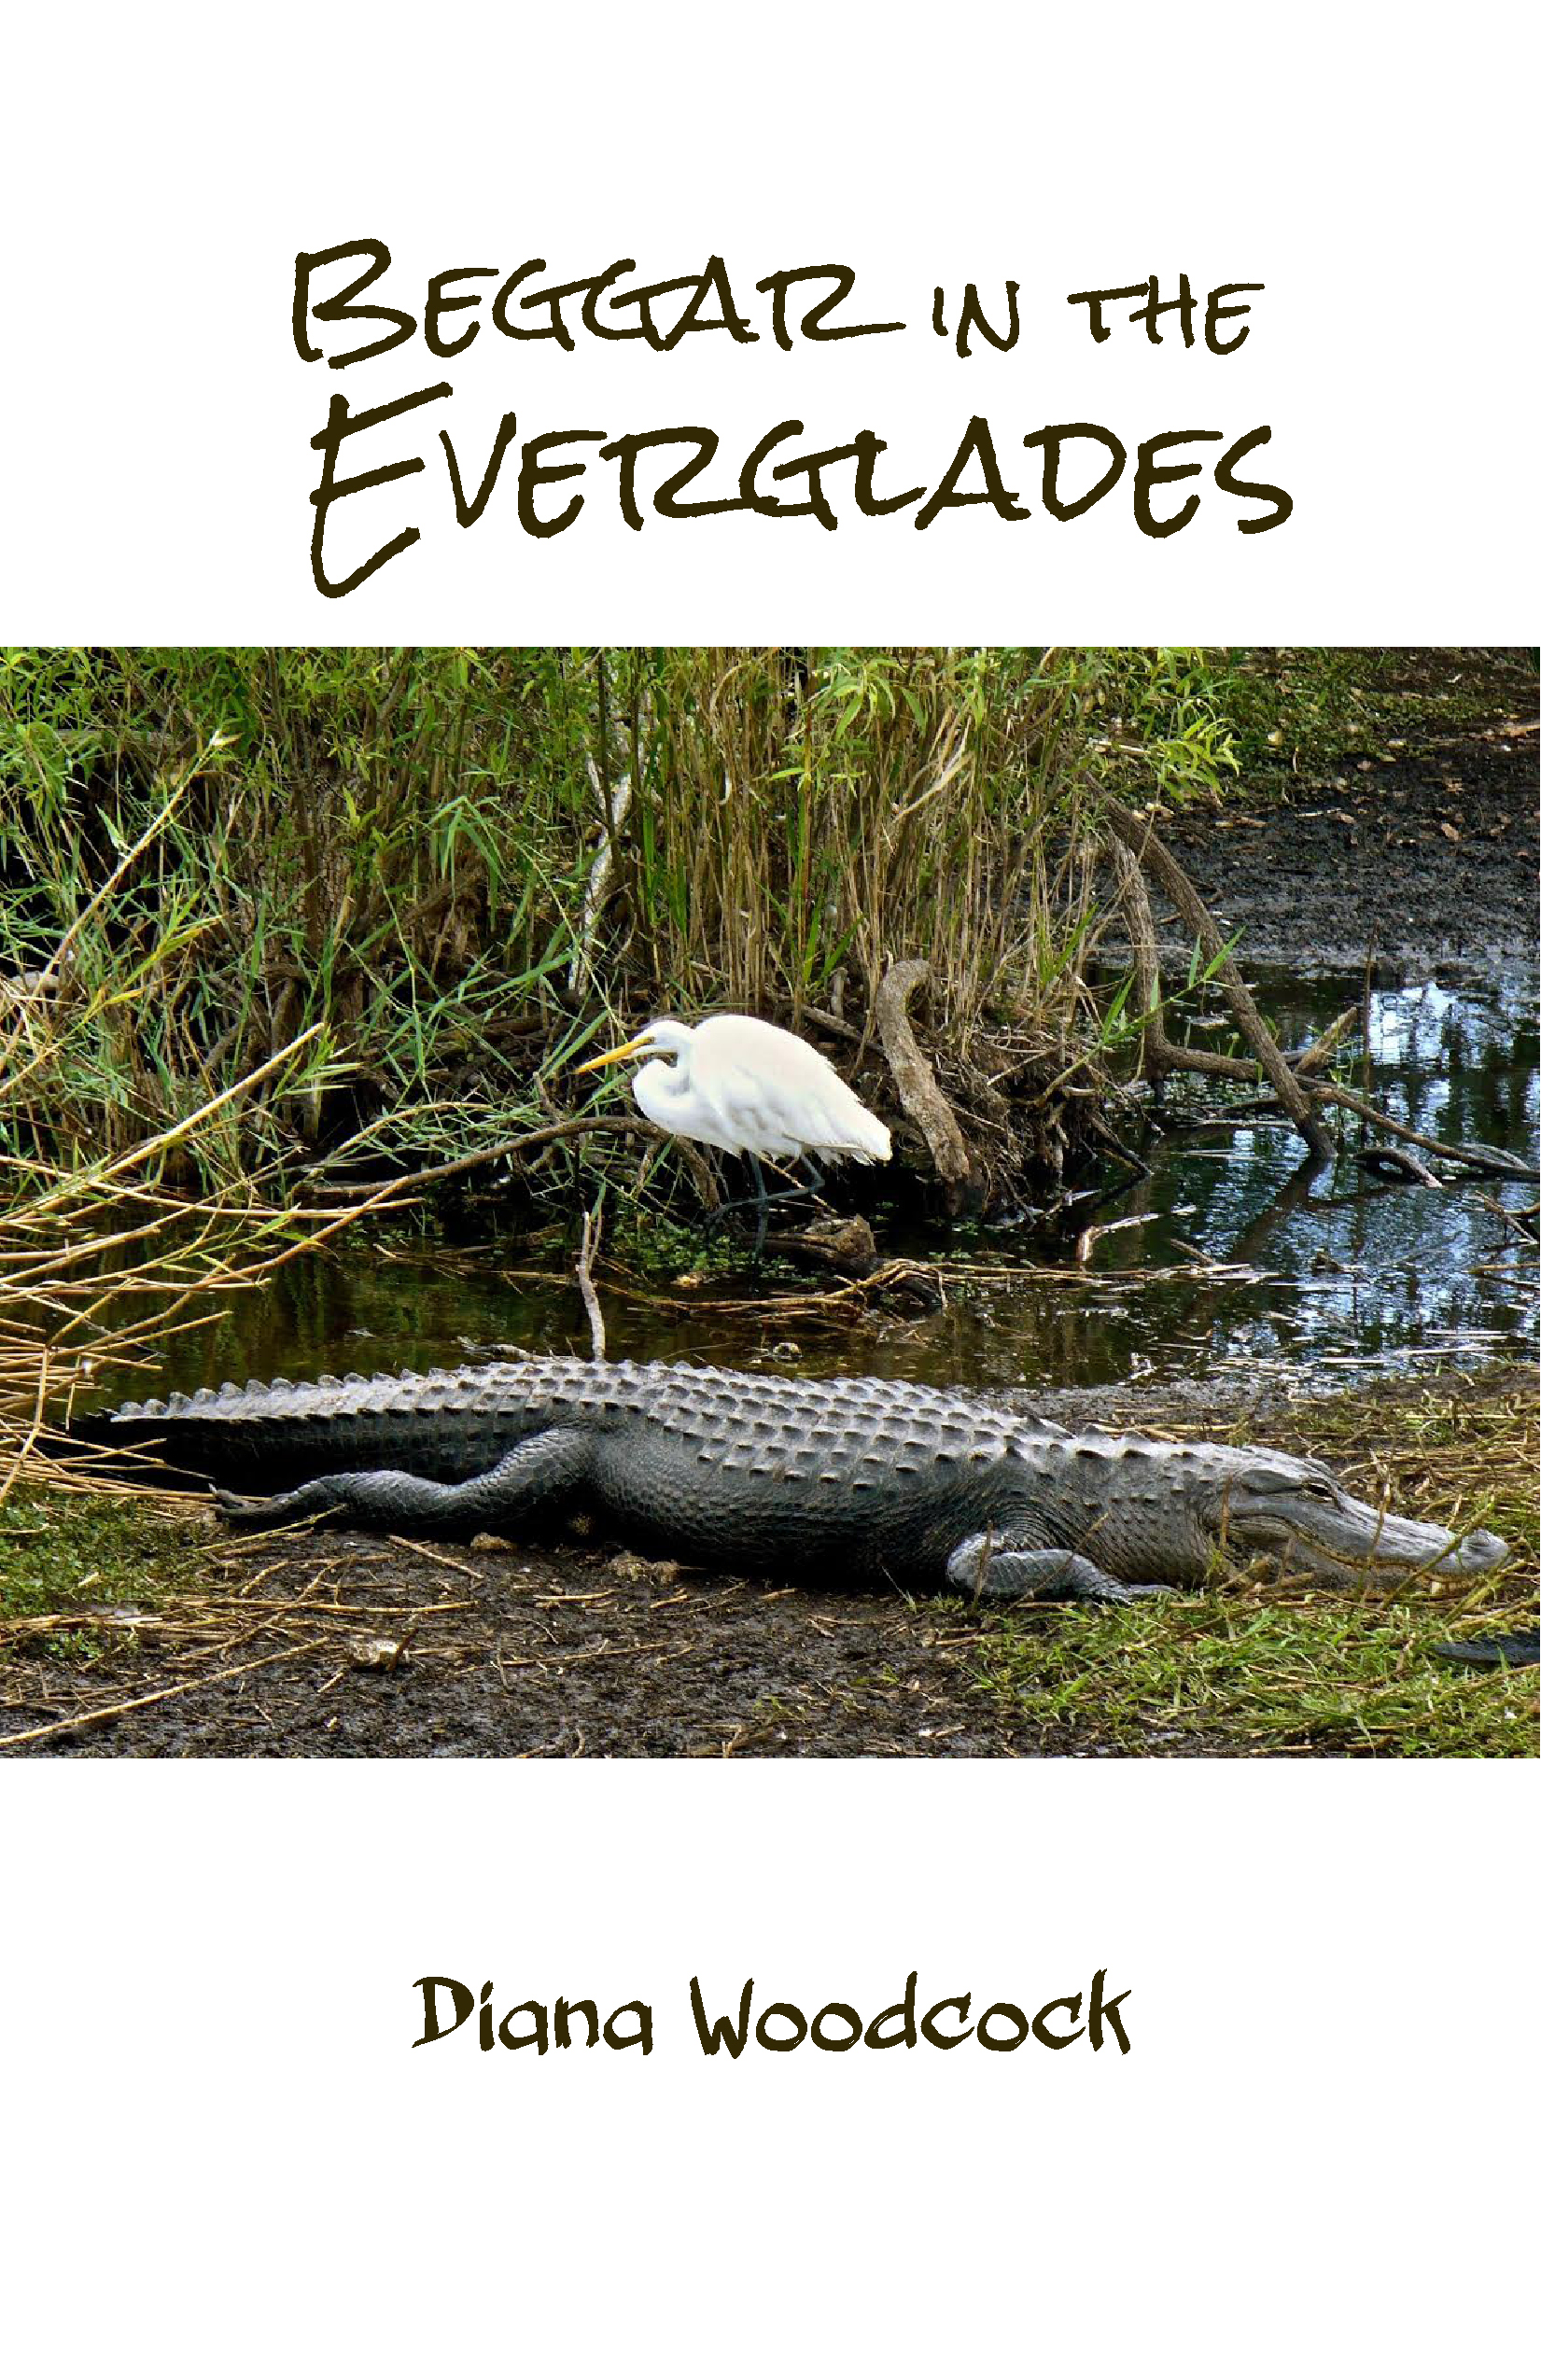 Book cover of BEGGAR IN THE EVERGLADES by Dr. Diana Woodcock.